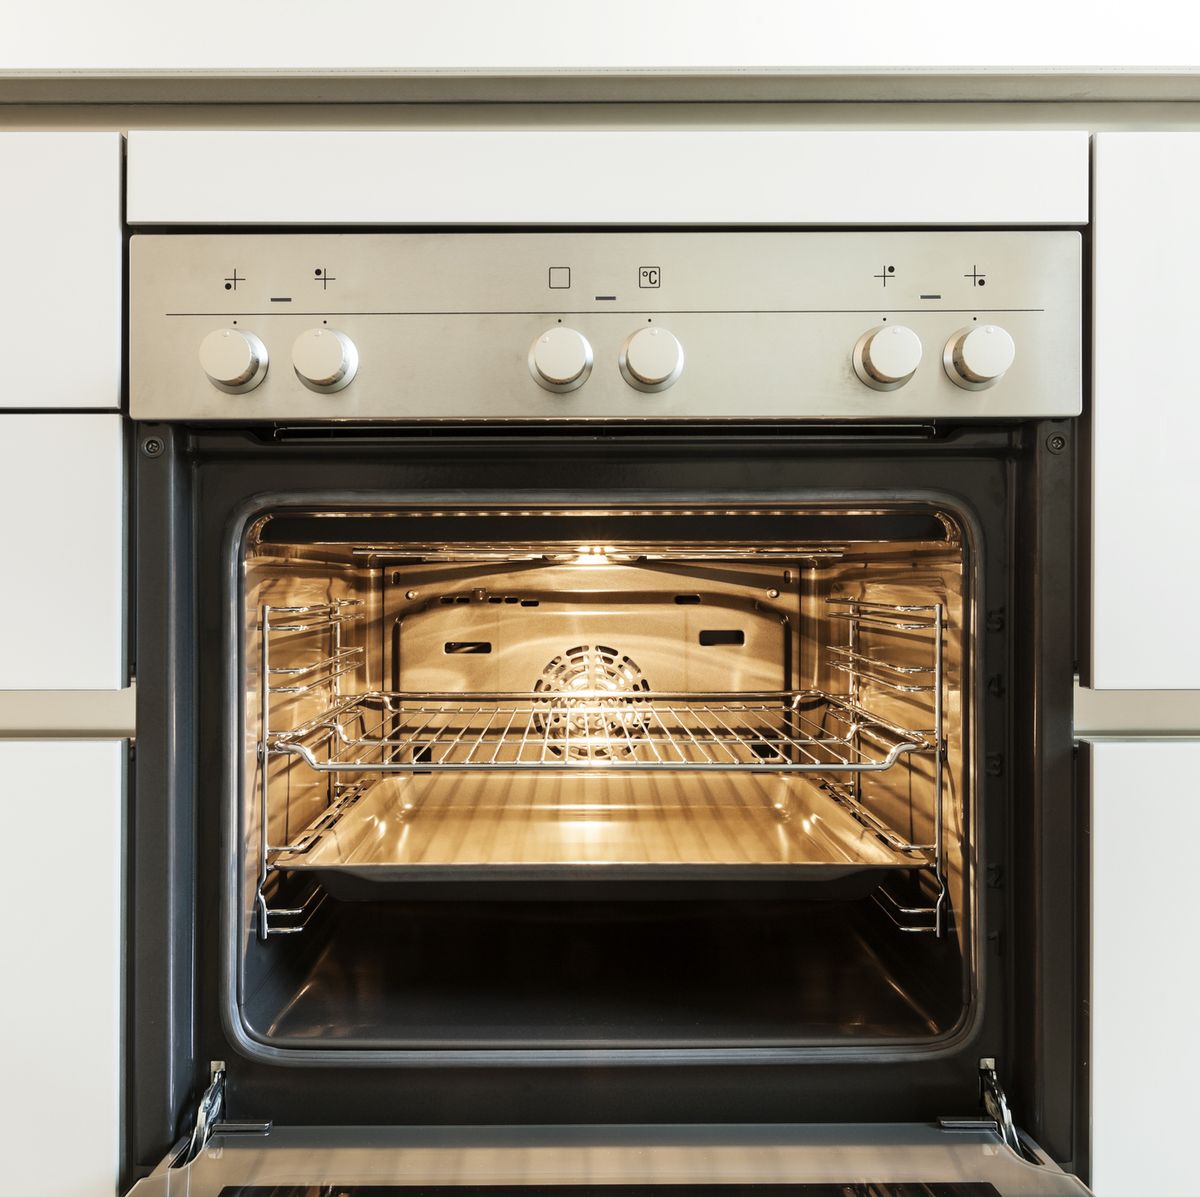 How to Clean Your Oven Using the Self-Clean Oven Function